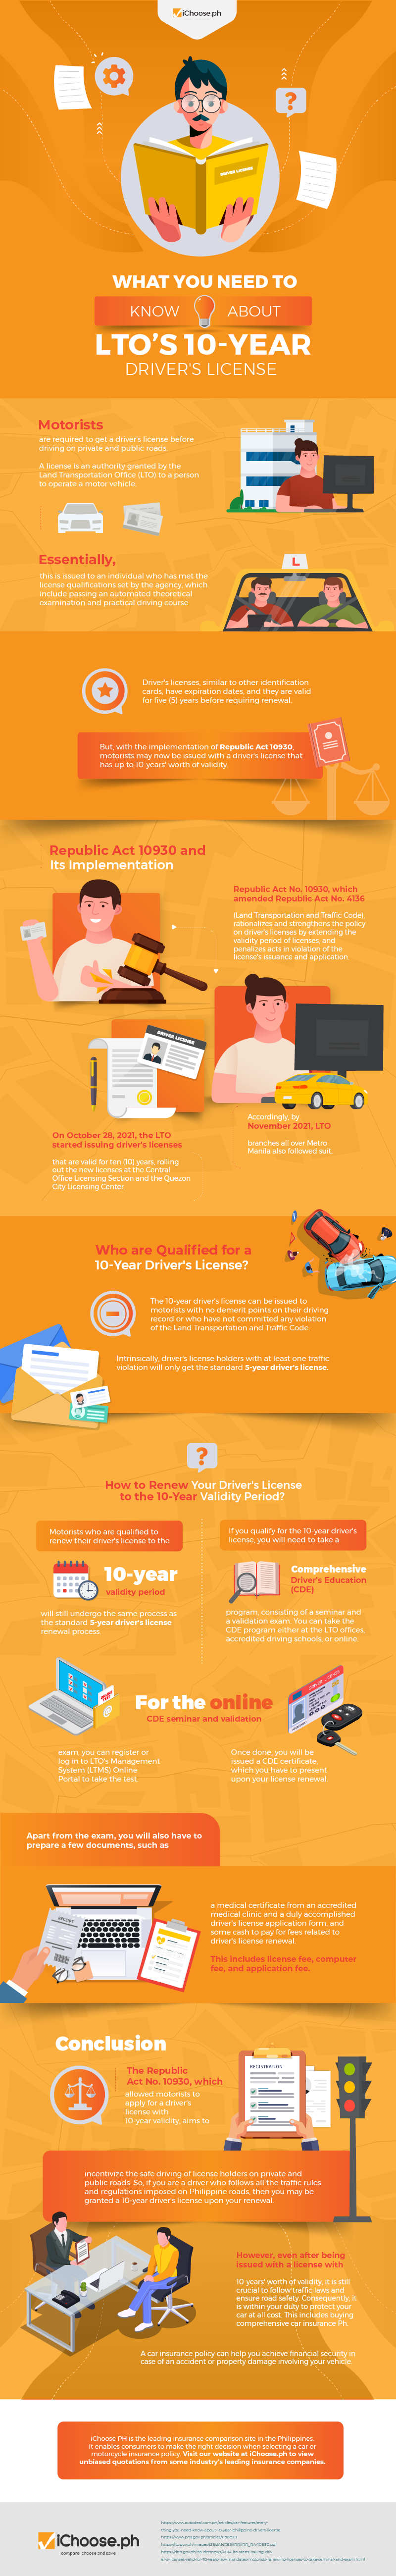 iChoose-PH-December-Infographic-1-What-You-Need-to-Know-About-LTOs-10-Year-Drivers-License-Infographic